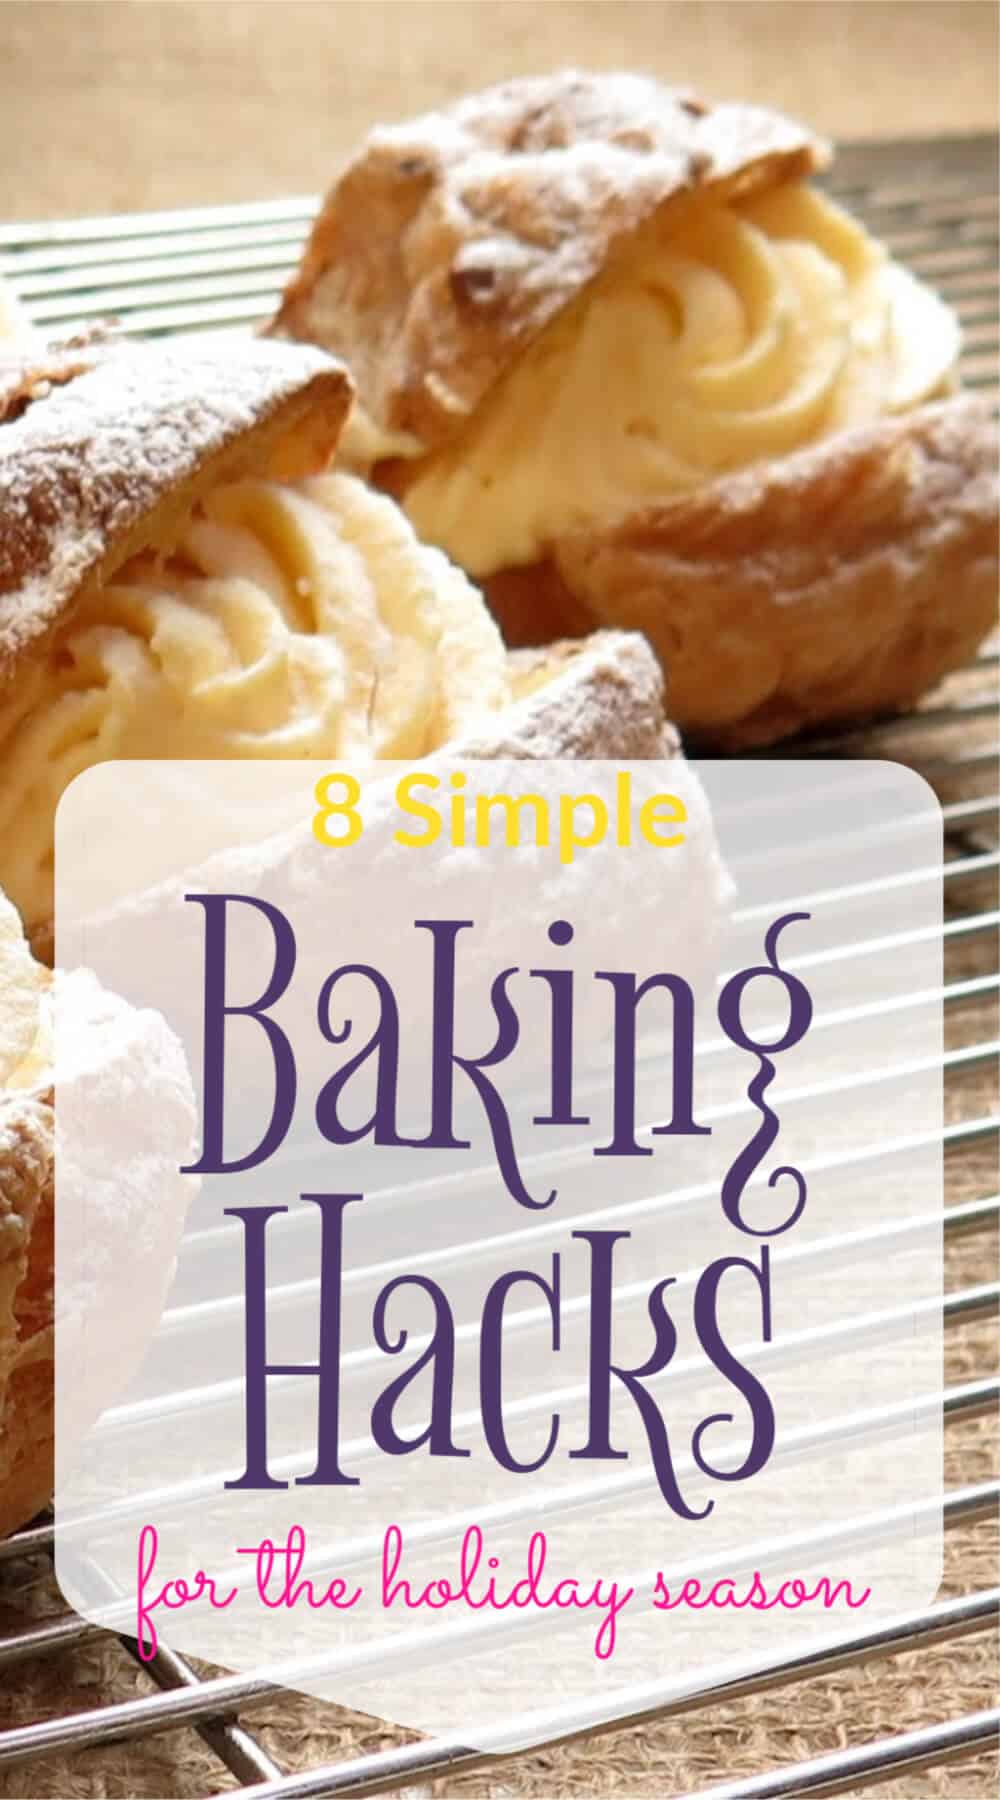 These simple baking hacks will not only help you save time in the kitchen, but they’ll also take your holiday baking up a notch. Use them this holiday season to simplify your baking and your life!